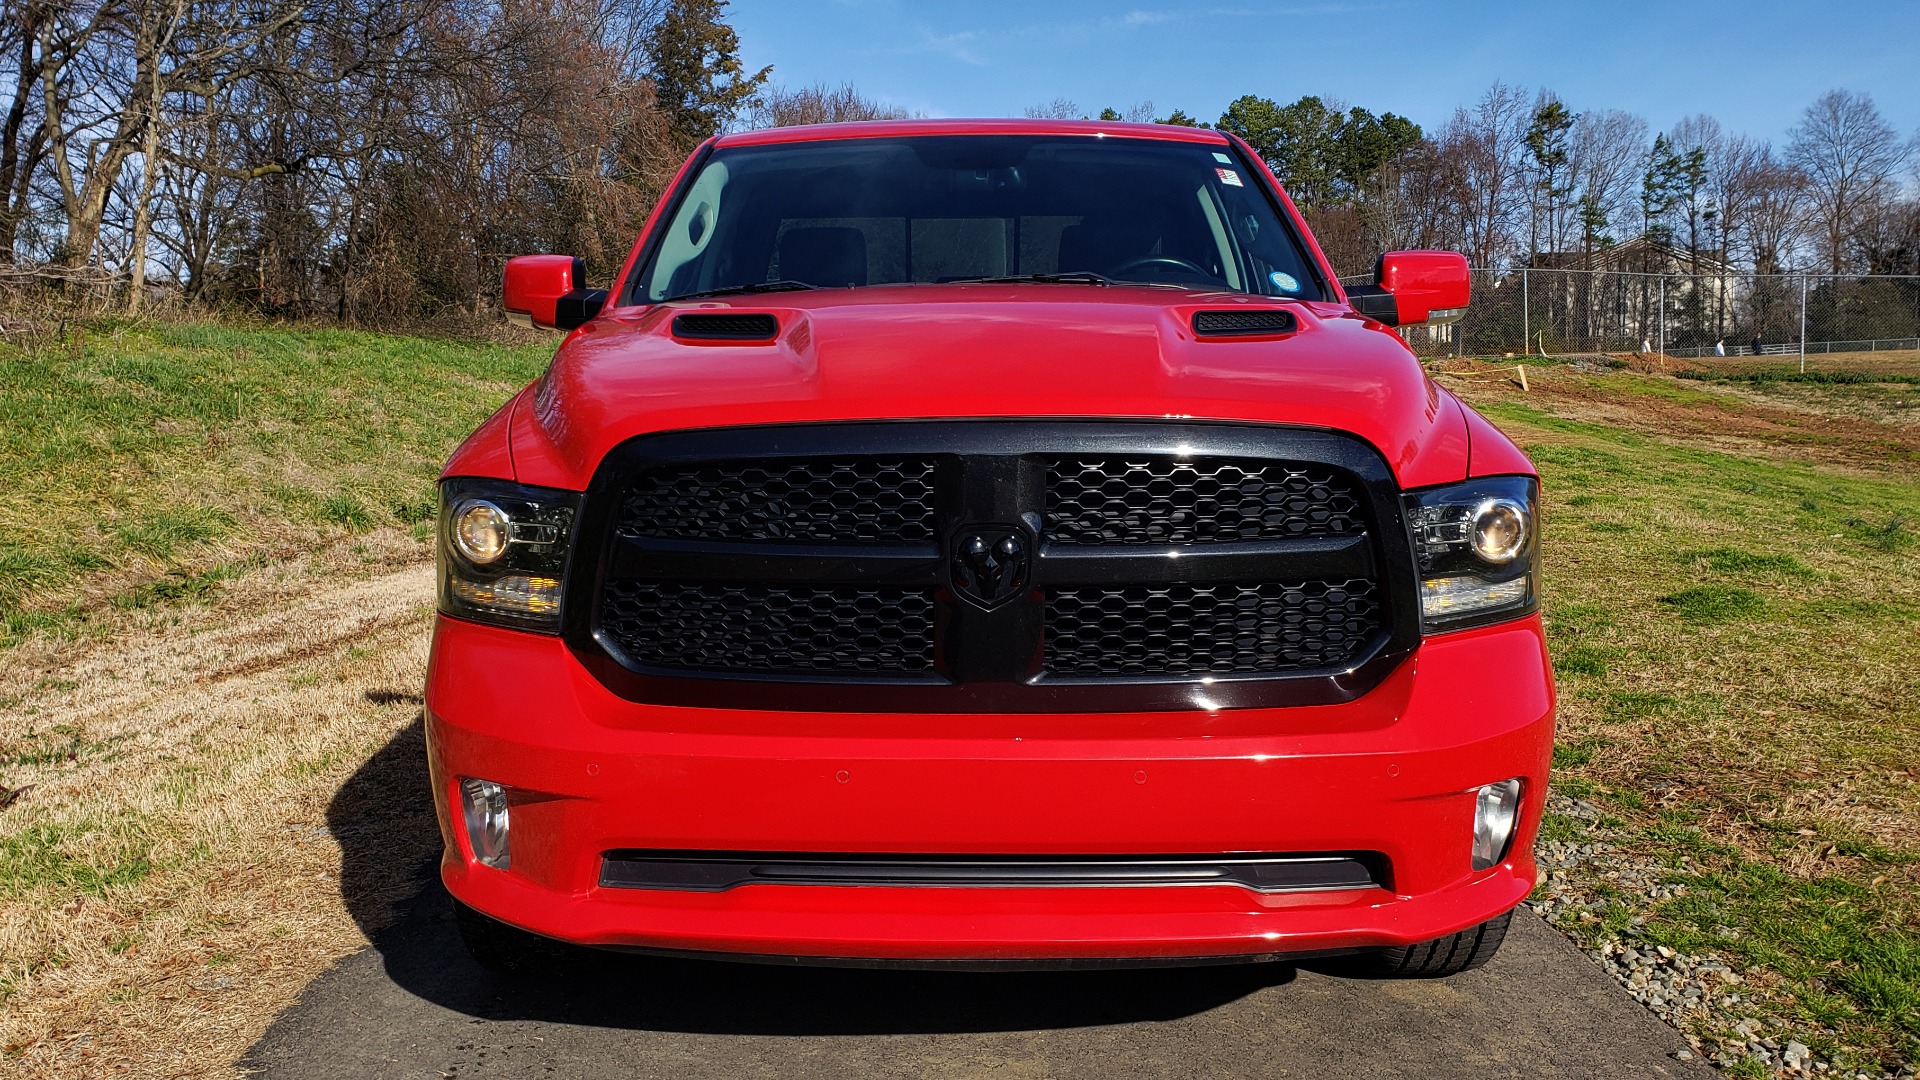 Used 2017 Ram 1500 NIGHT EDITION CREWCAB 4X4 / NAV / PARKSENSE for sale Sold at Formula Imports in Charlotte NC 28227 9